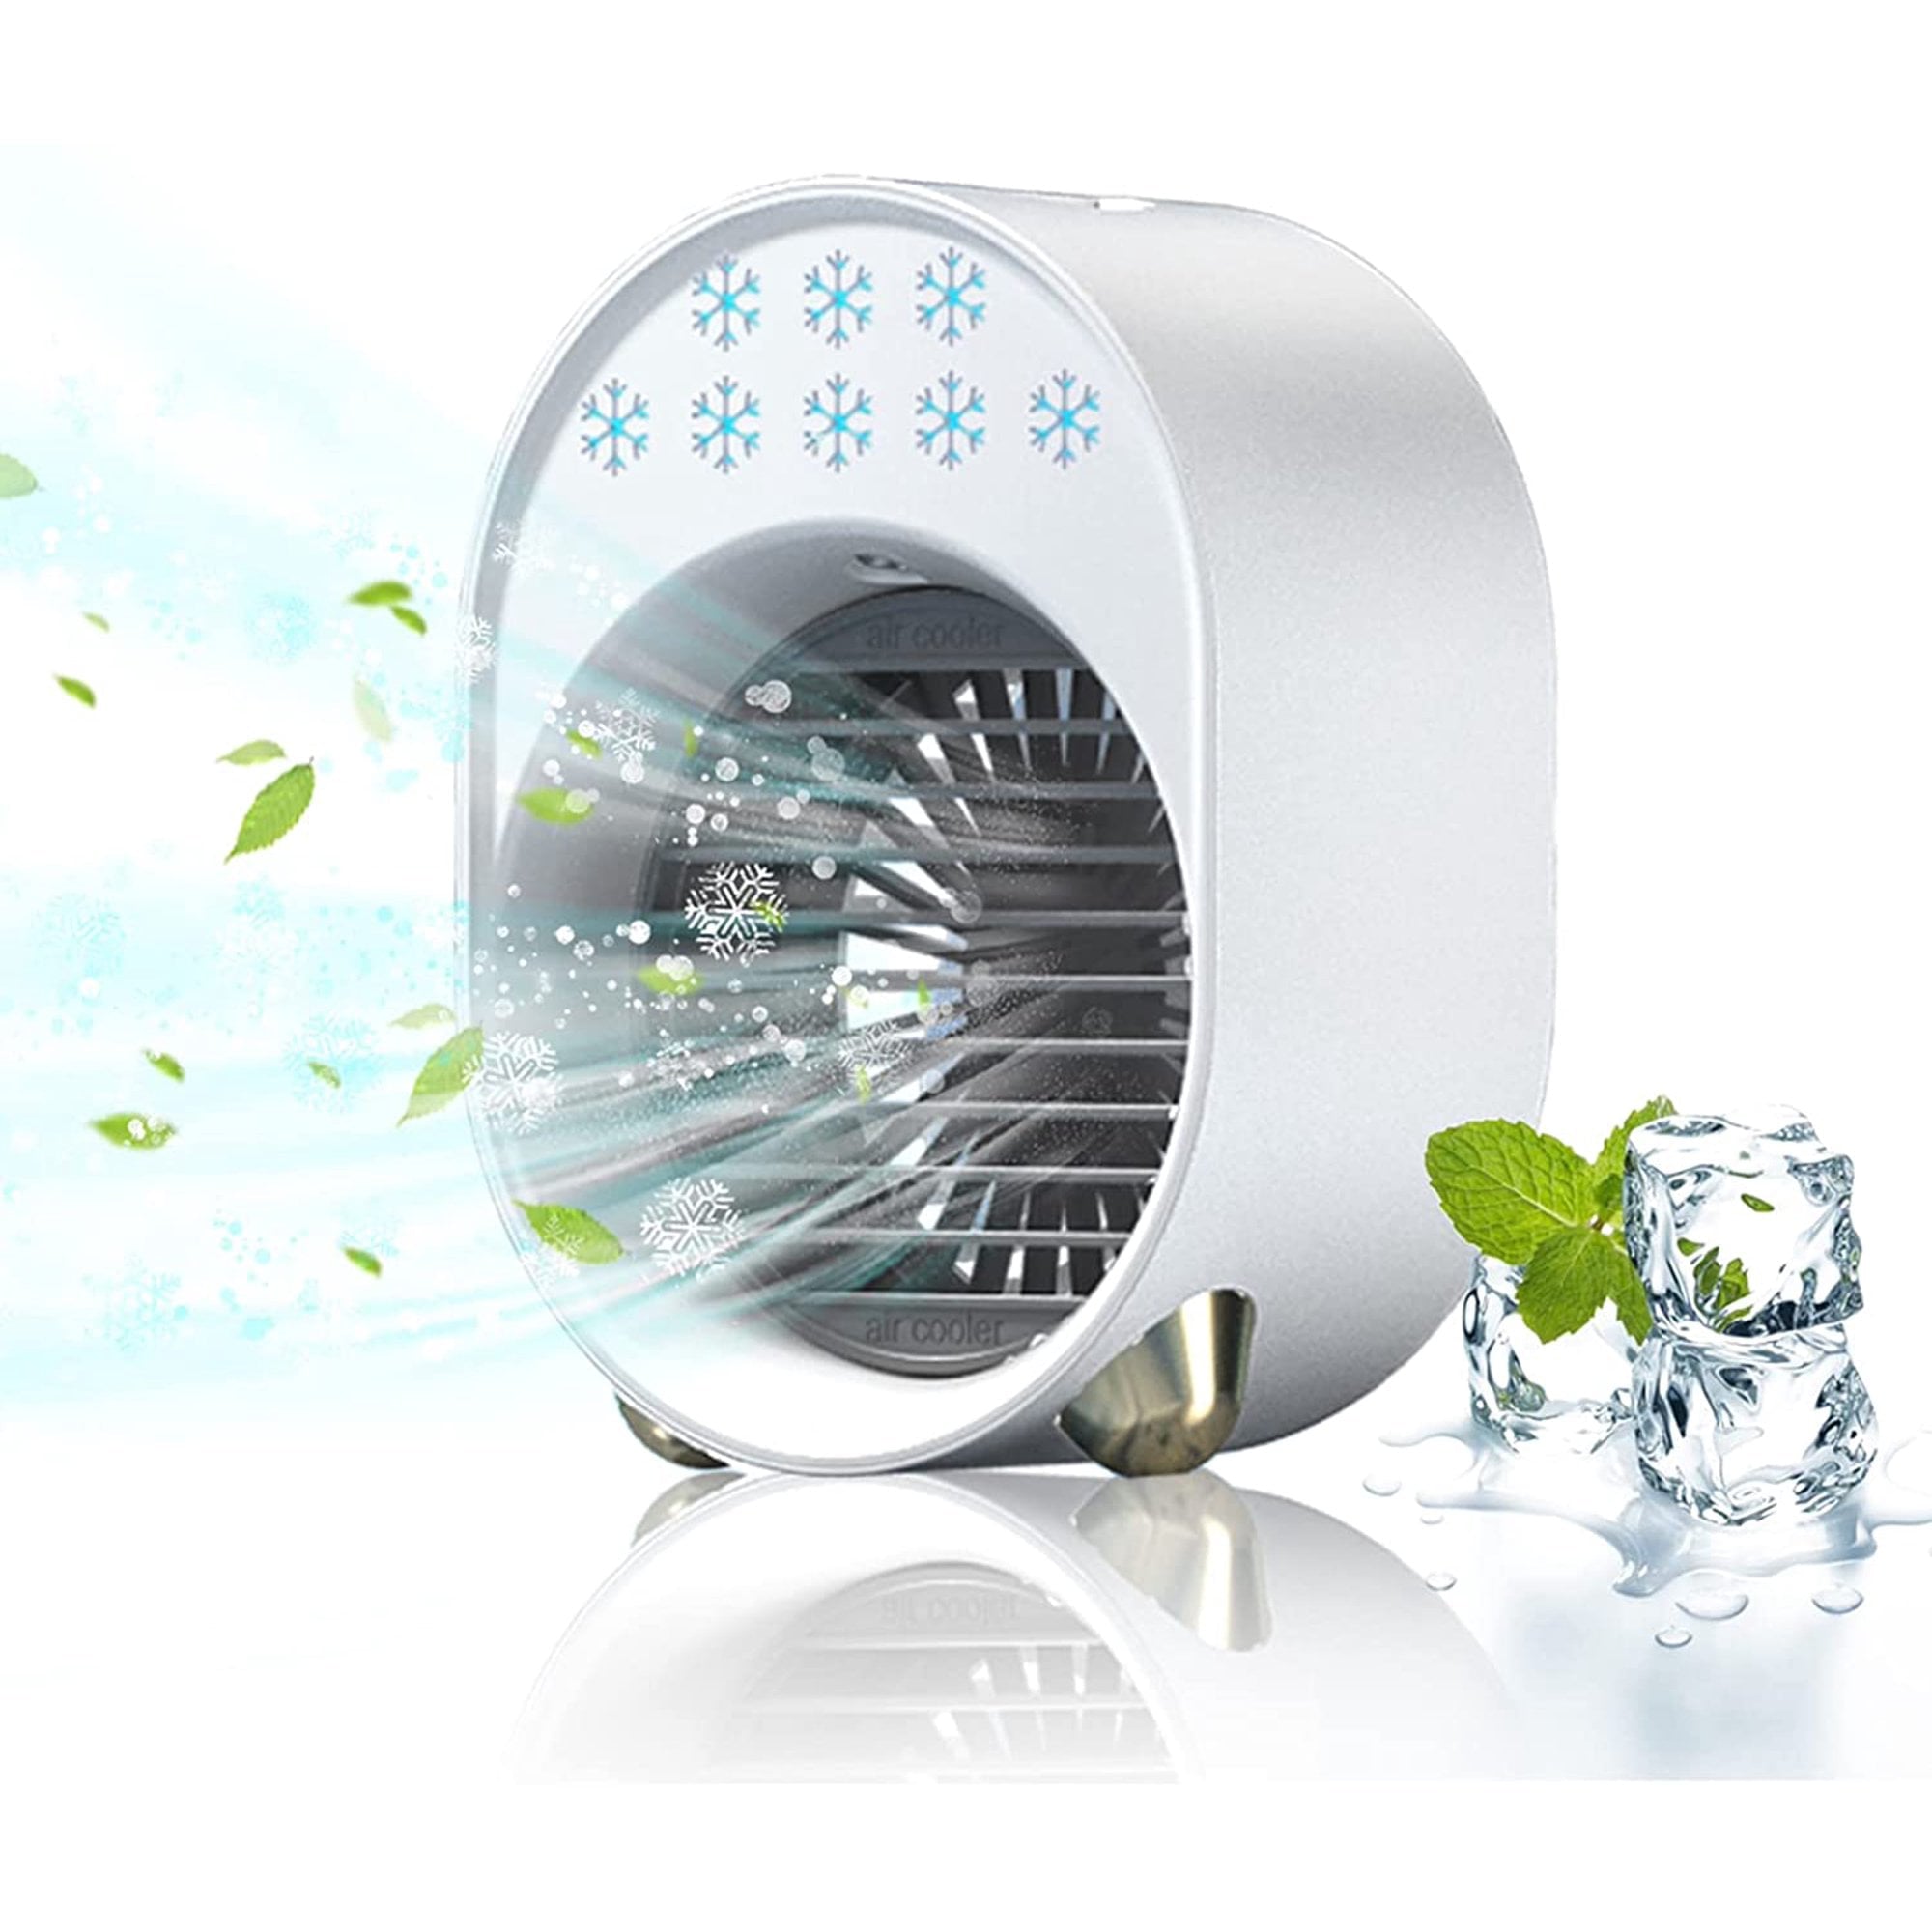 Melliful Portable Air Conditioner Fan with 220ml Water Tank, Personal Air Cooler Fan Mini Evaporative Desk Fan USB Small, 3 Wind Speeds, Temperature Display, Quiet for Home Office